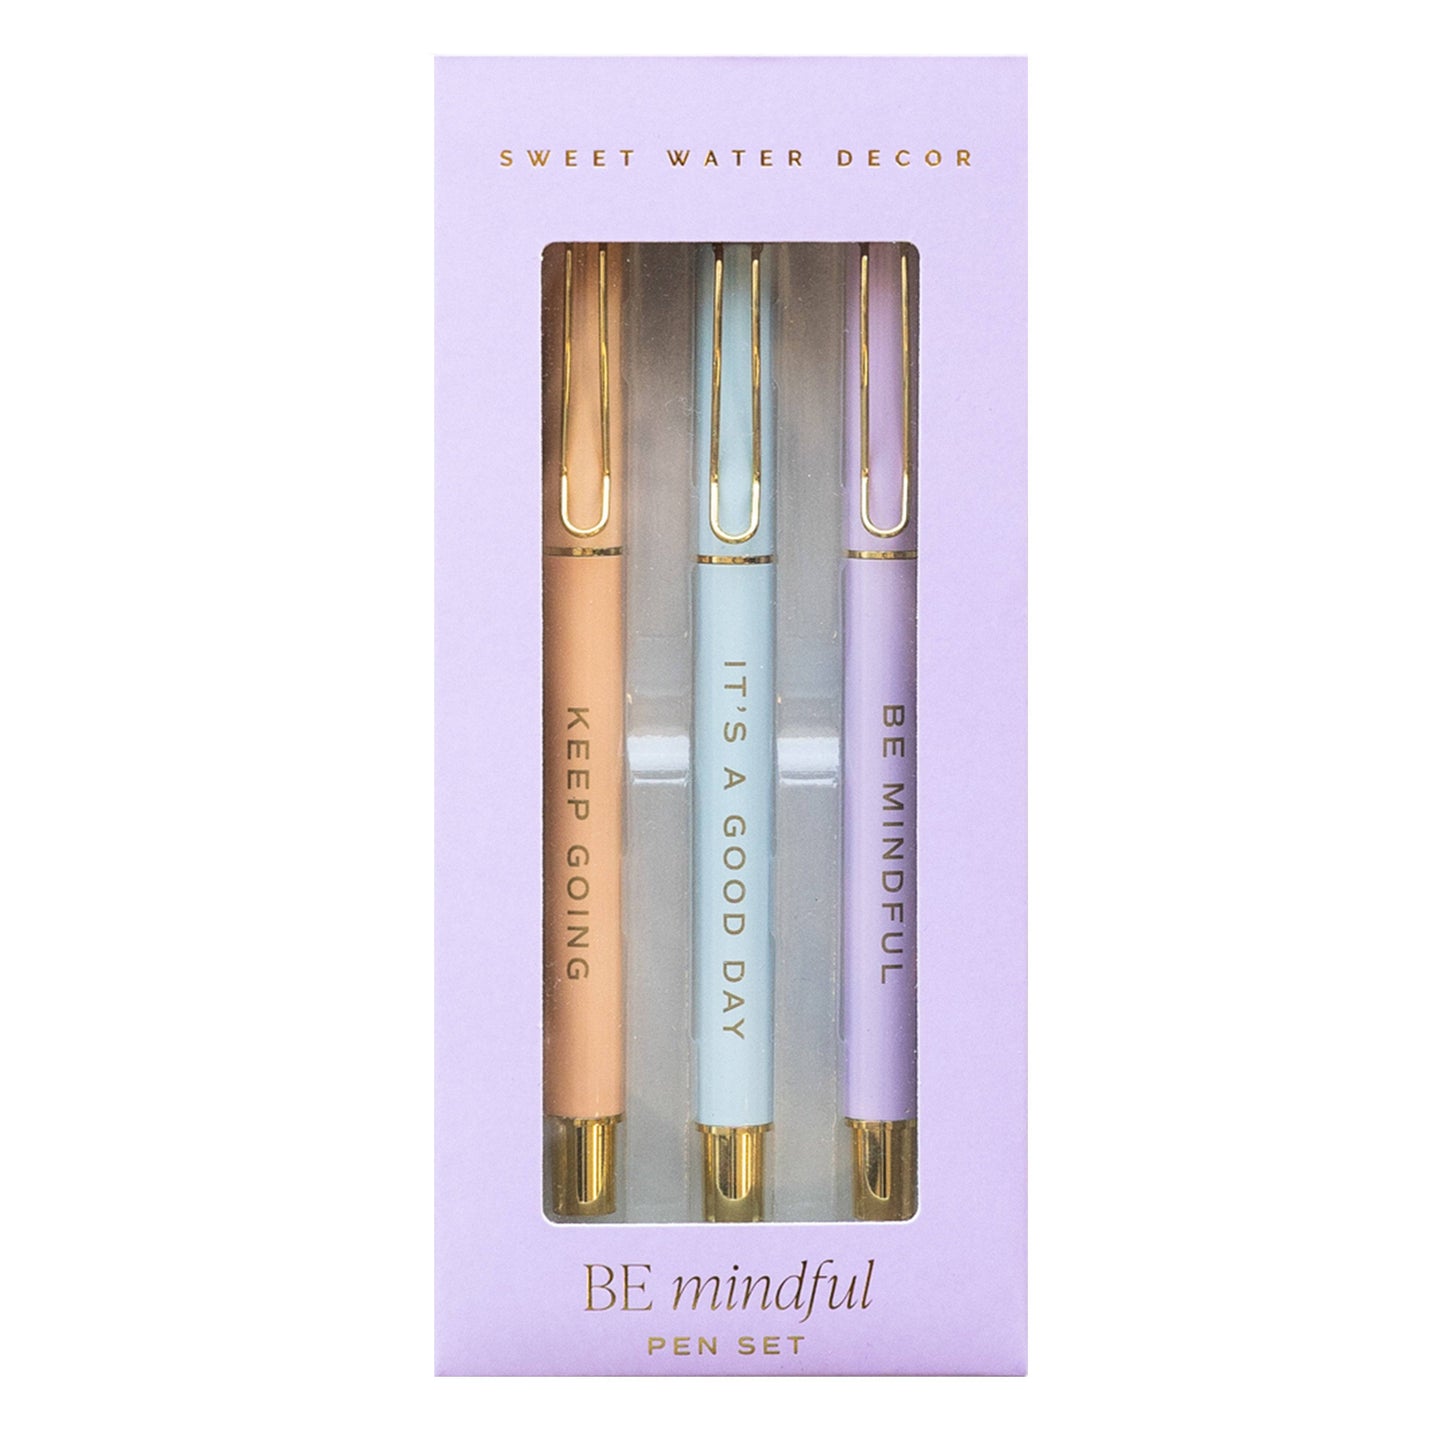 Sweet Water Decor - Be Mindful Metal Pen Set - Home Decor & Gifts